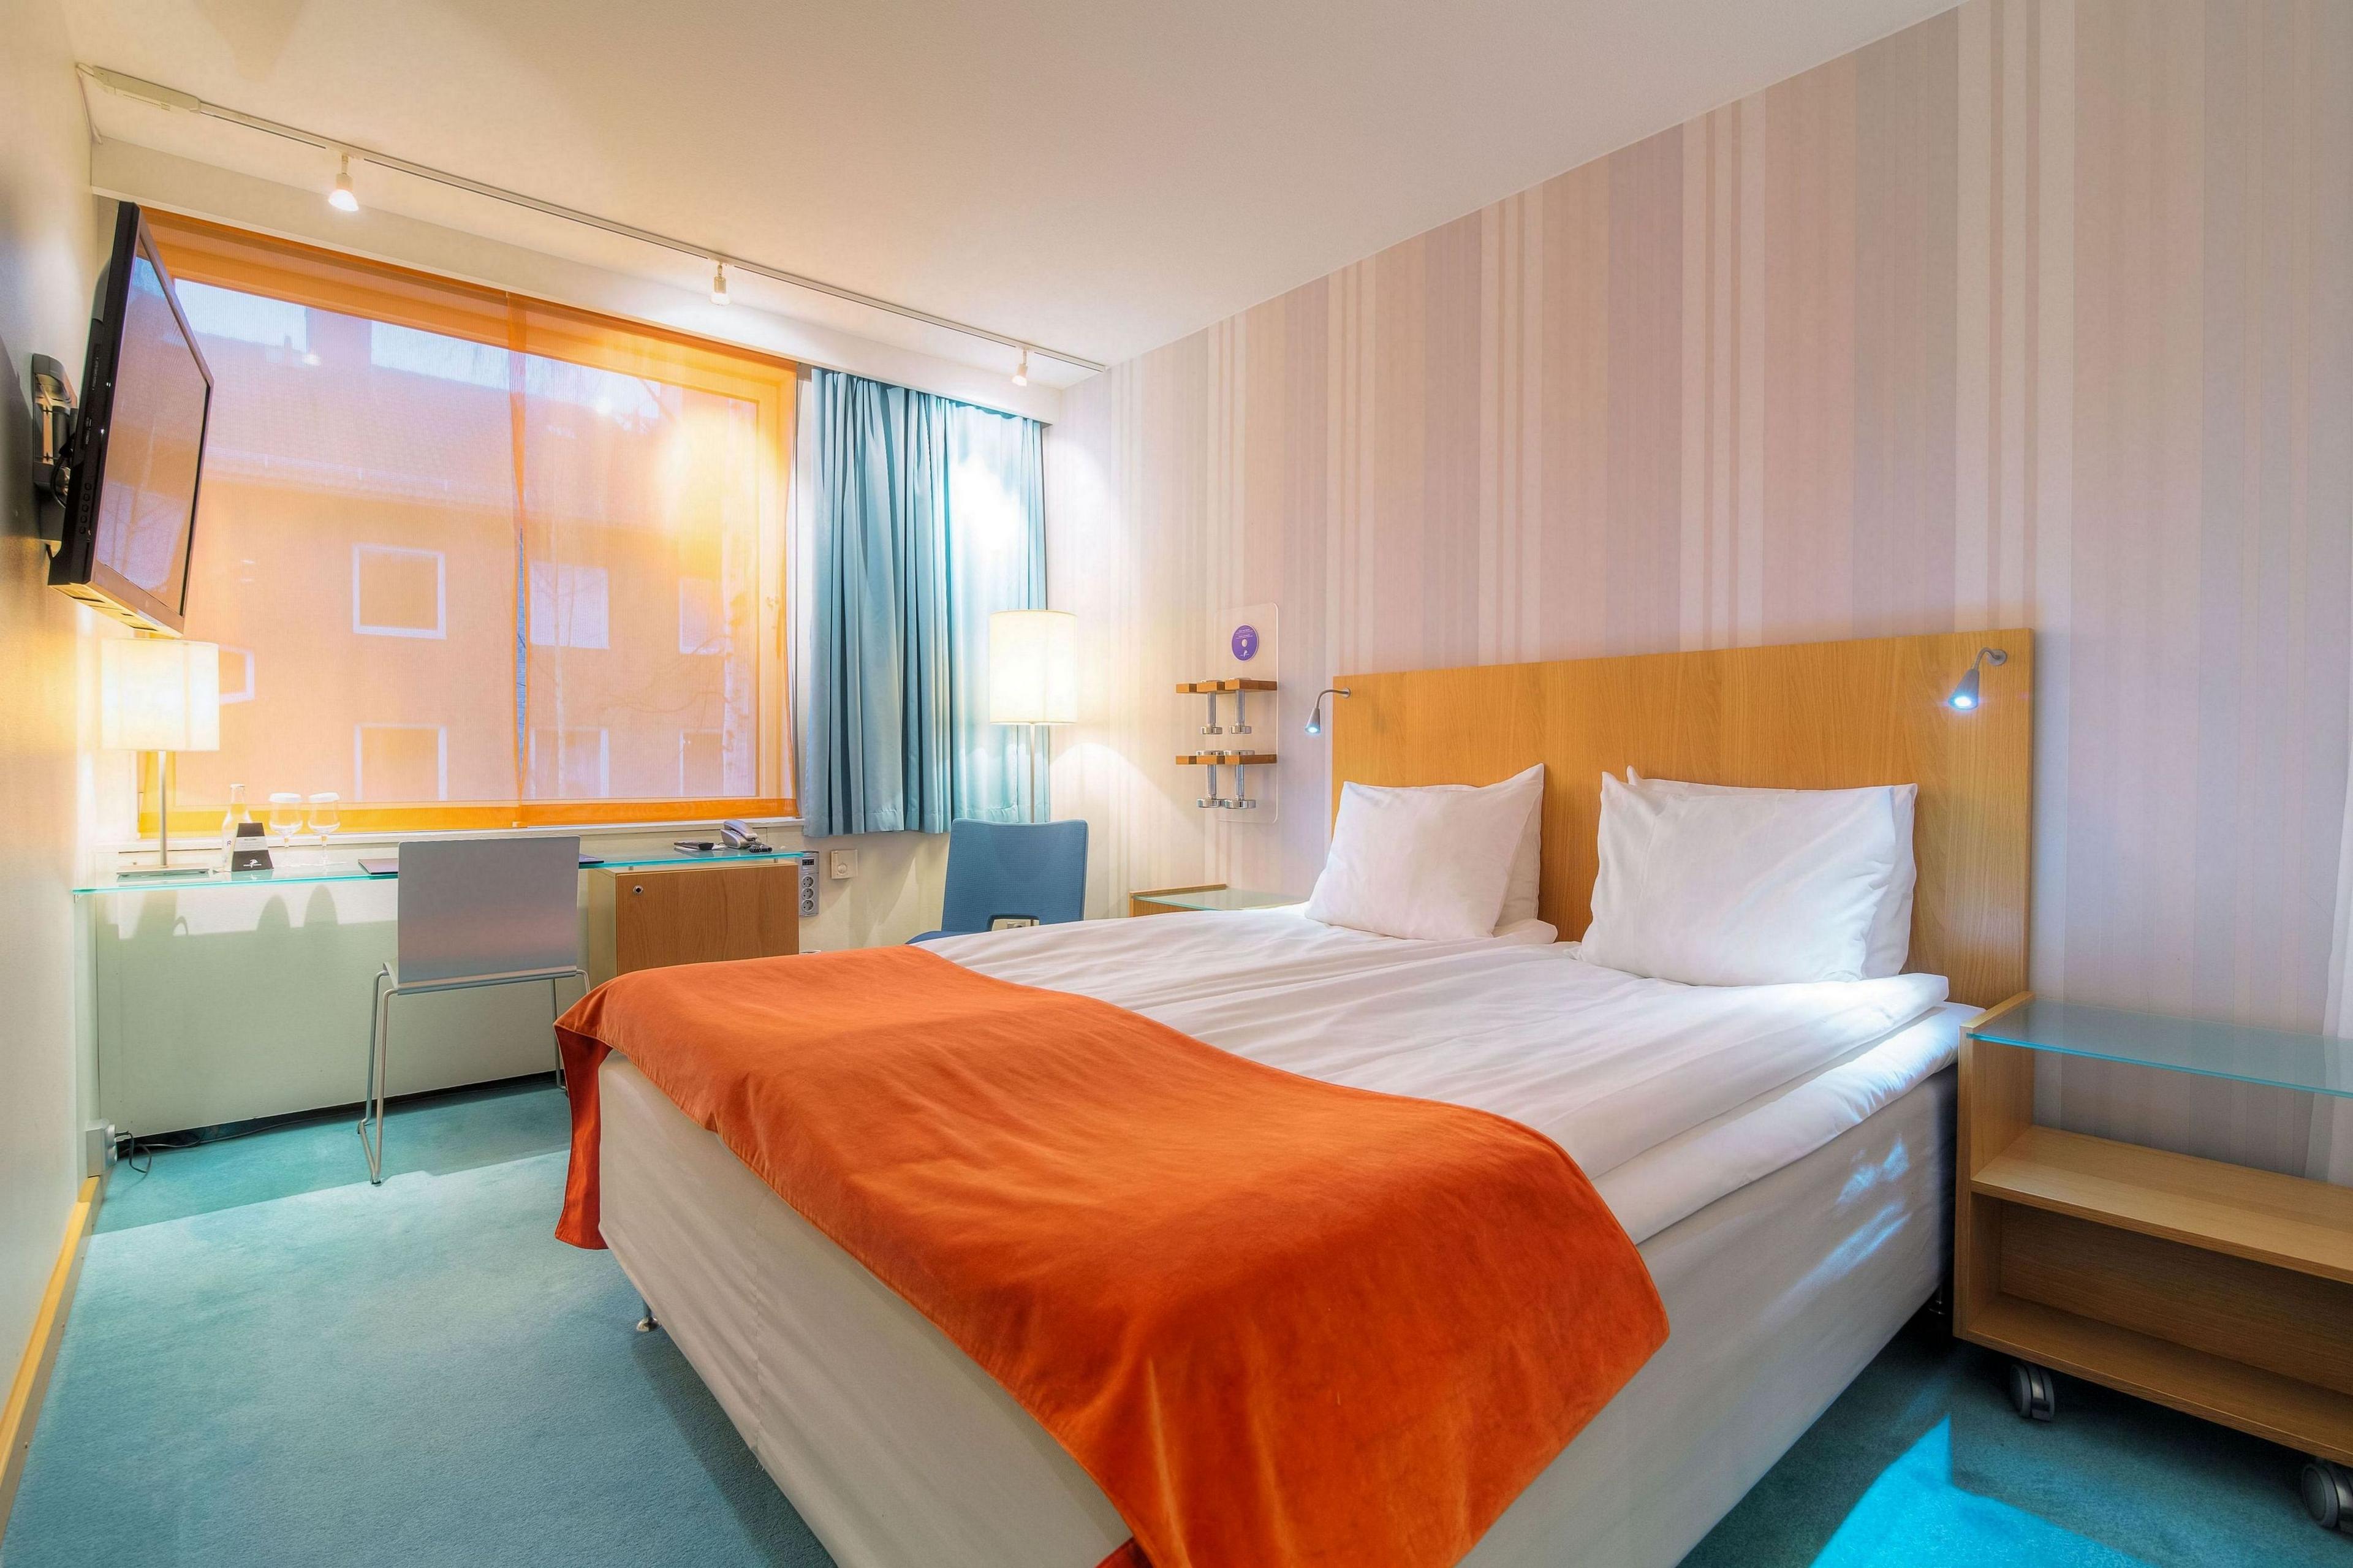 Room with one Carpe Diem bed 160 cm. Wooden floor or carpet and tiled bathroom with rain shower. Work desk, relaxing chair, mini bar, flatscreen TV, WiFi, hair dryer, safety box, umbrella and complimentary bottle of mineral water. Free access to Formtoppen Gym.